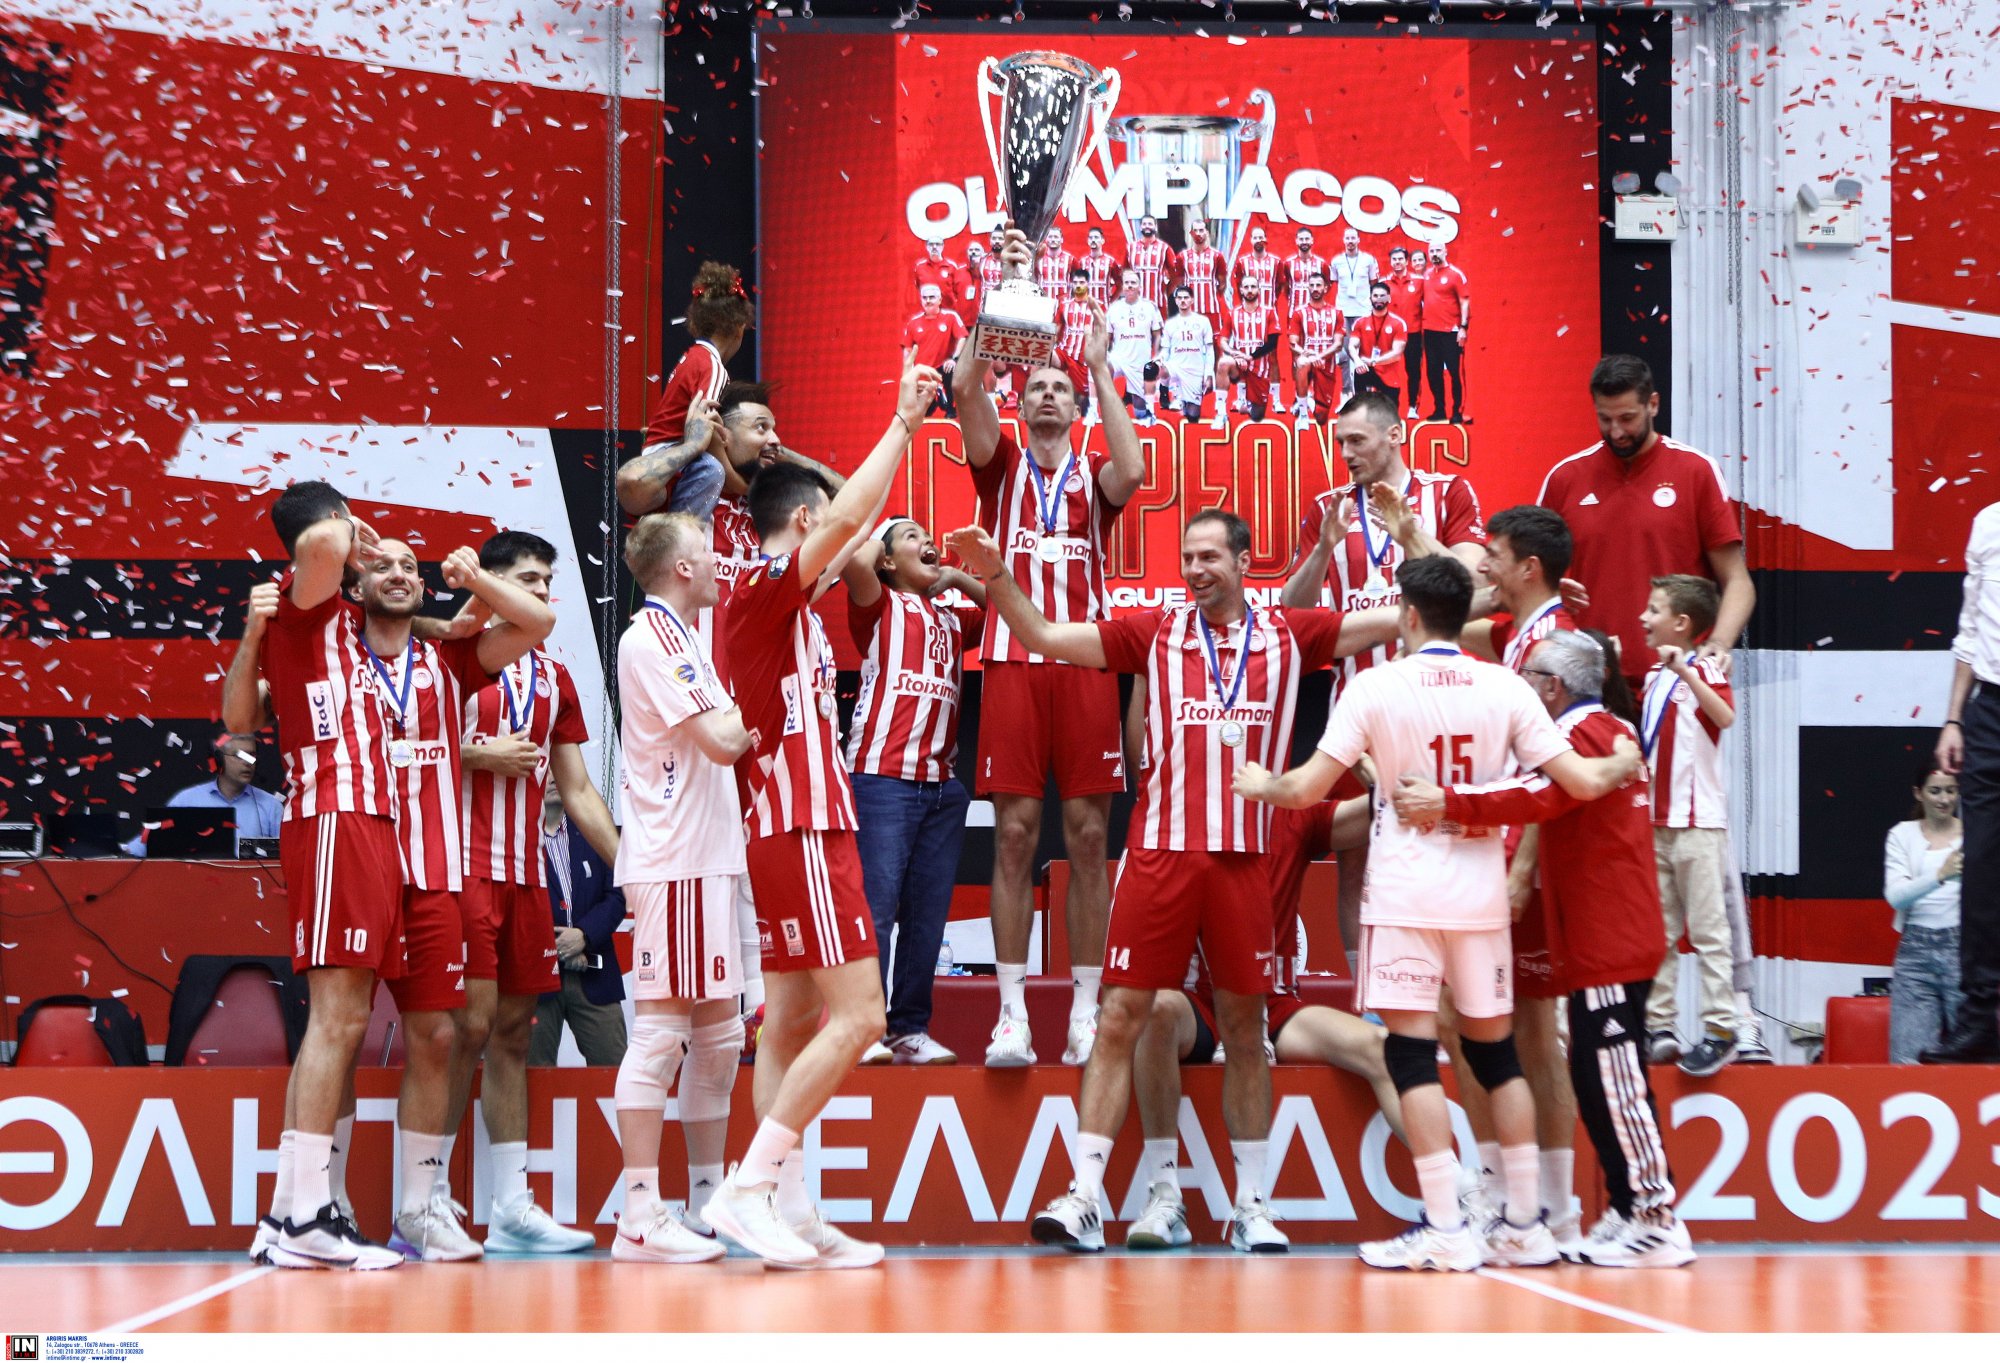 A return to the Champions League has boosted Olympiacos significantly